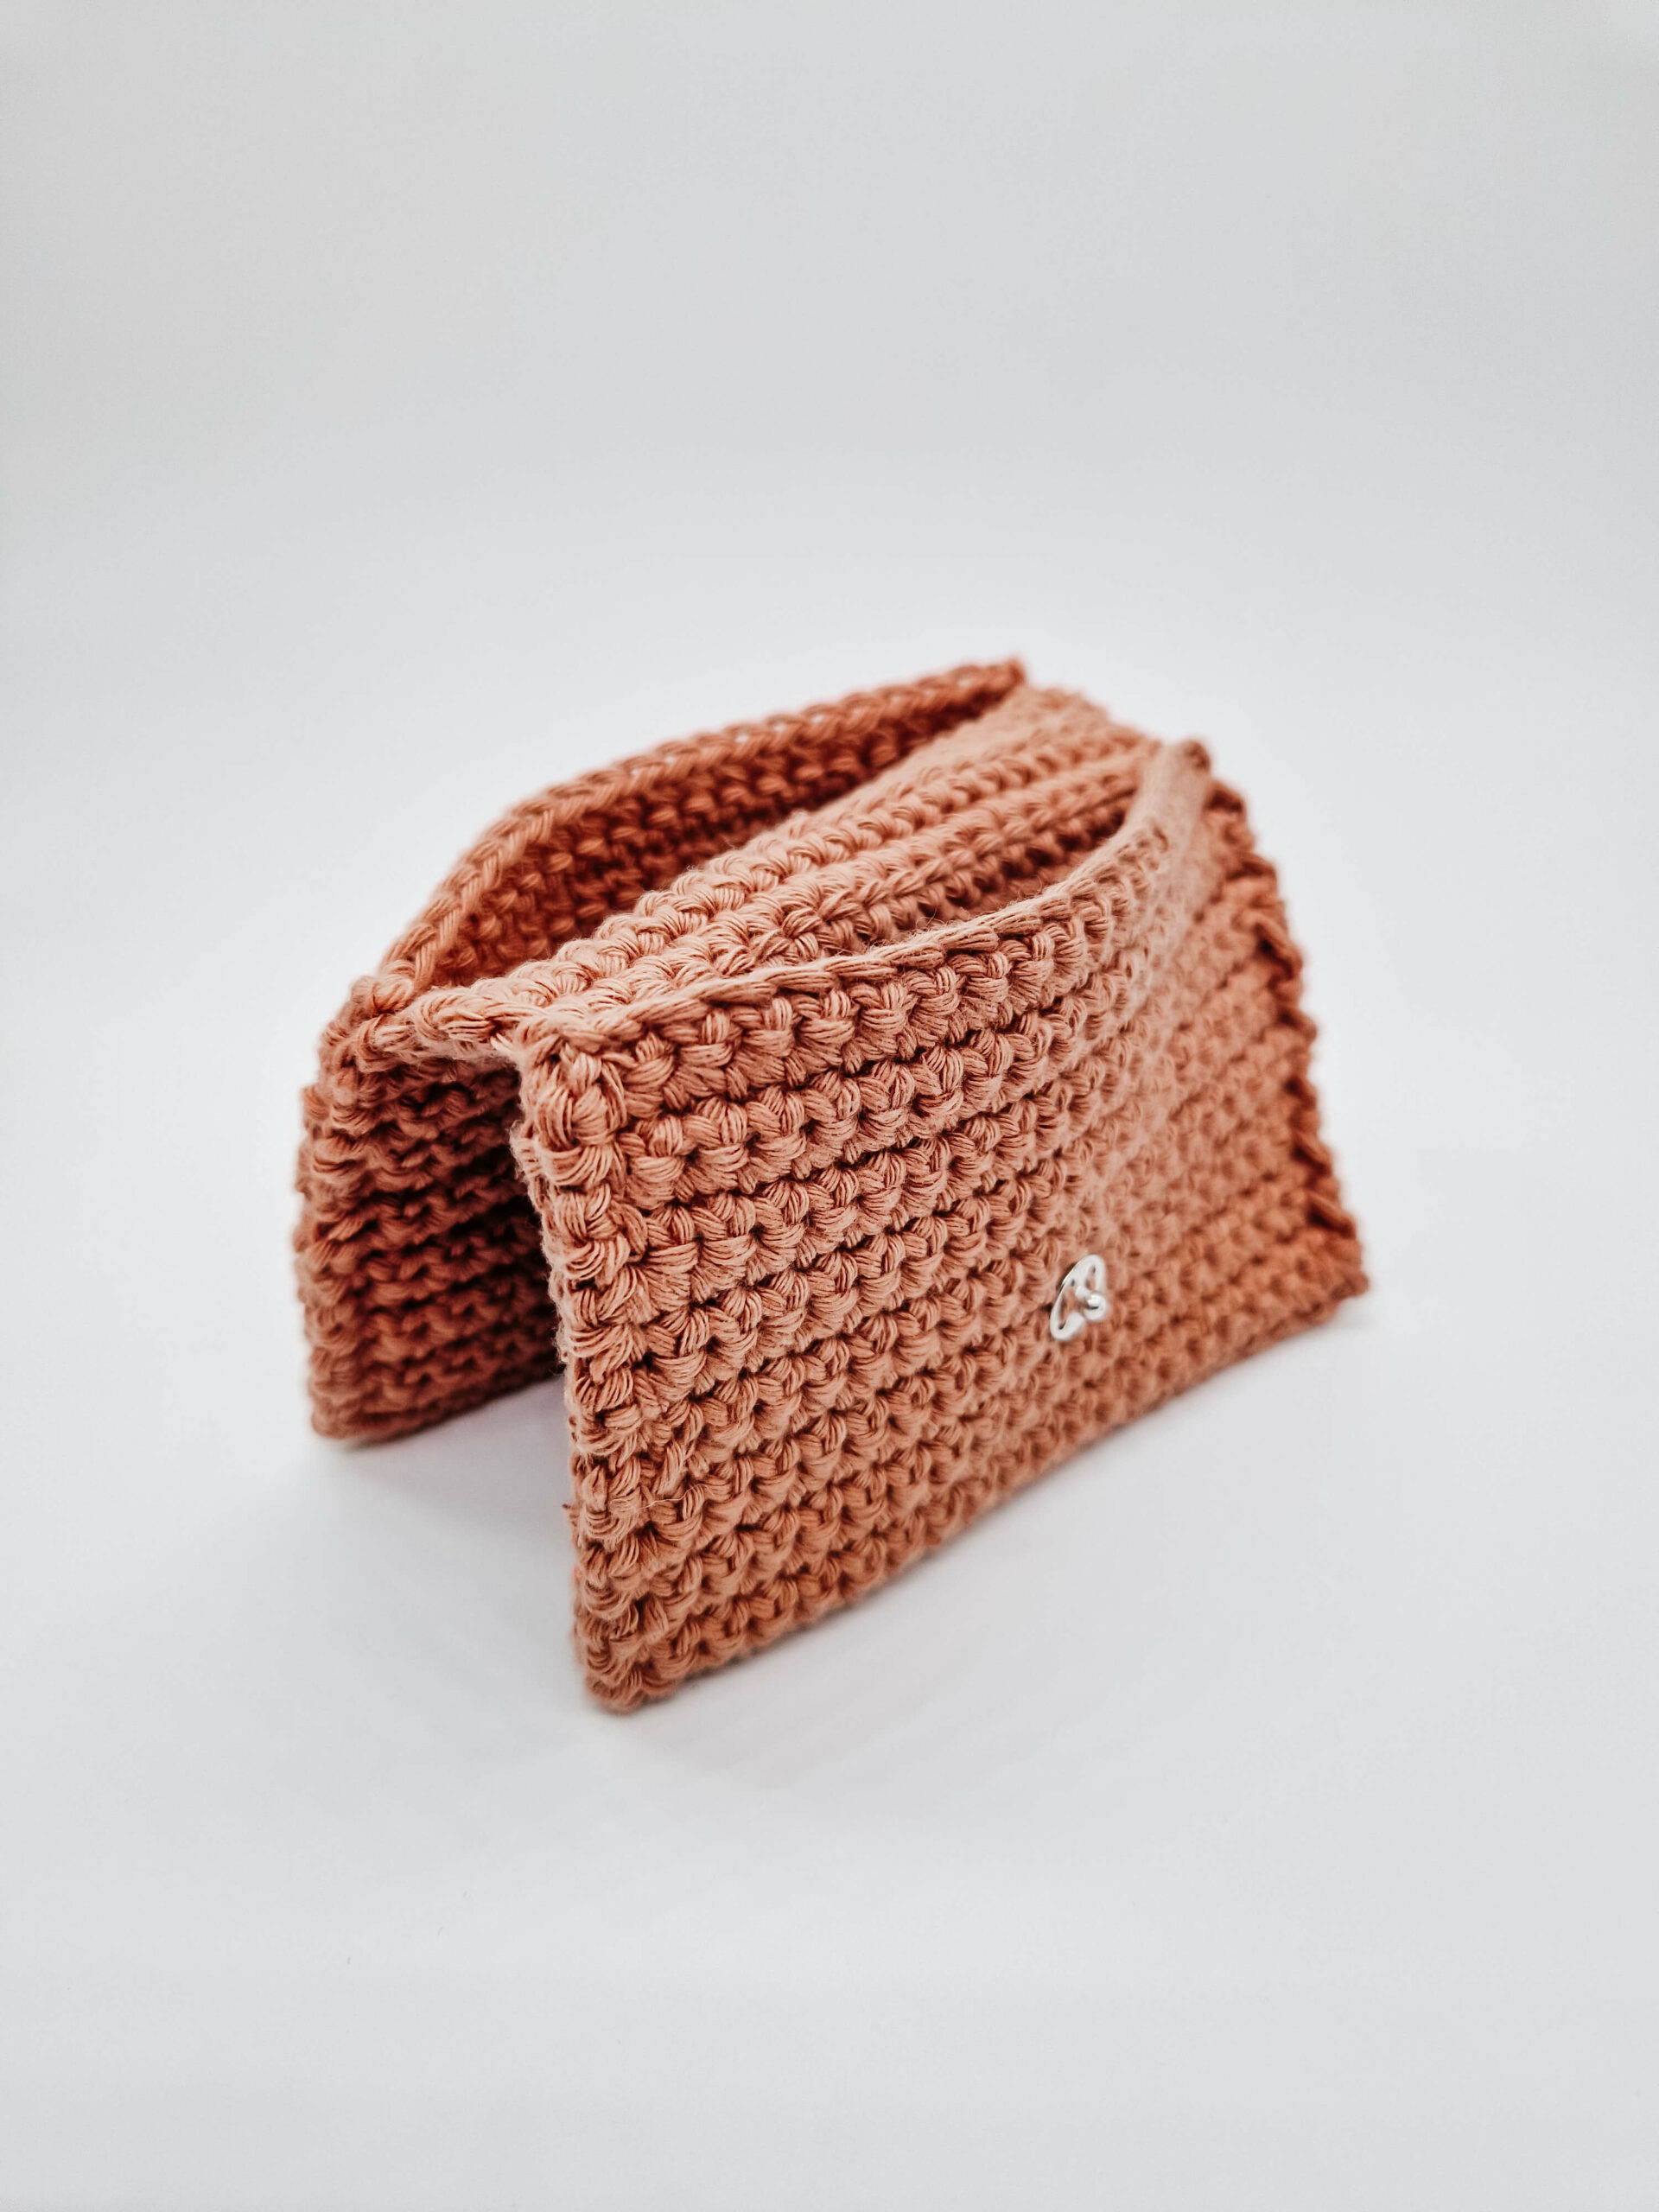 Beginner’s Guide to Crafting the Perfect Single Crochet Wallet